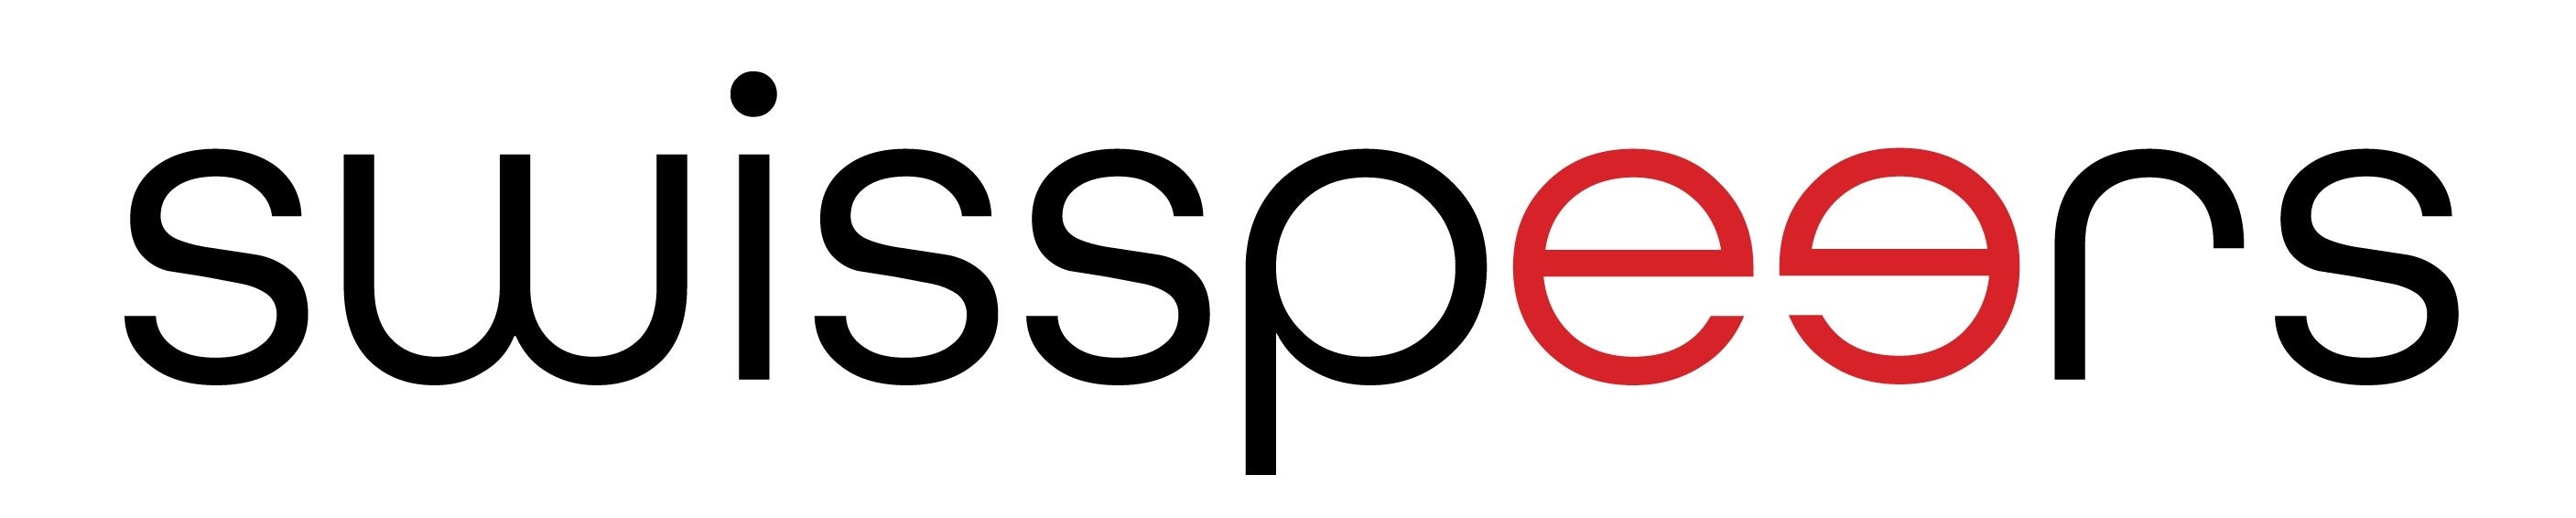 The logo is a word picture mark and is represented in the colors black and red.